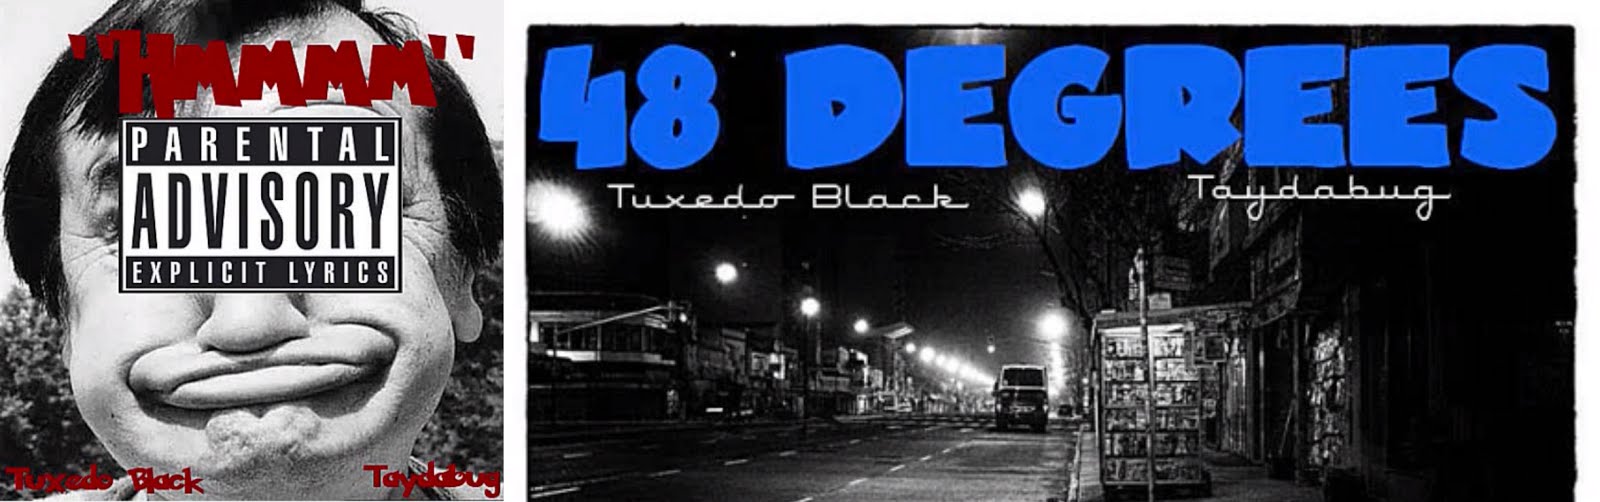 Tuxedo Black and Taydabug Release Two New Singles On The Same Day!